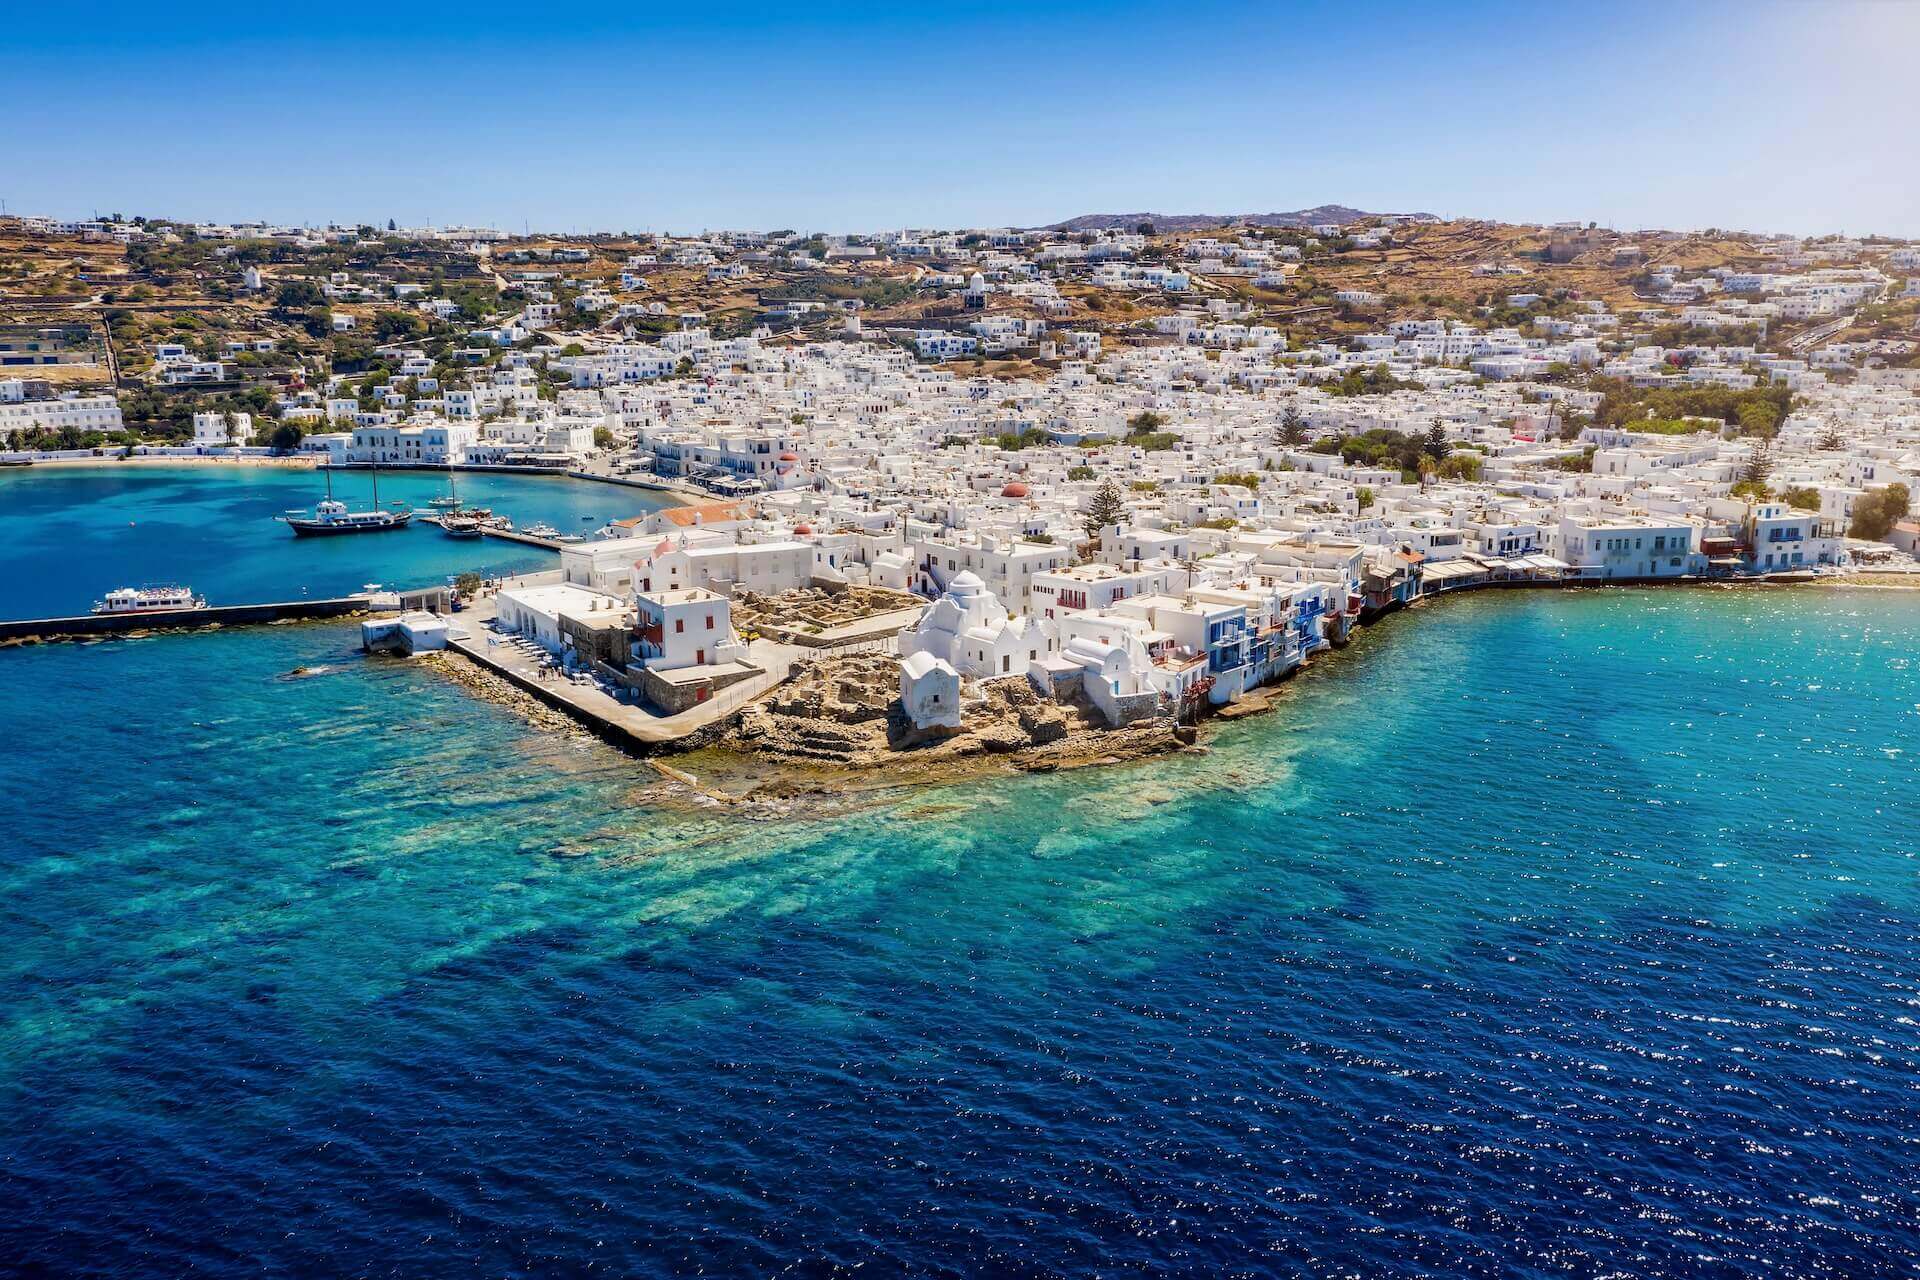 View of Mykonos town from the air